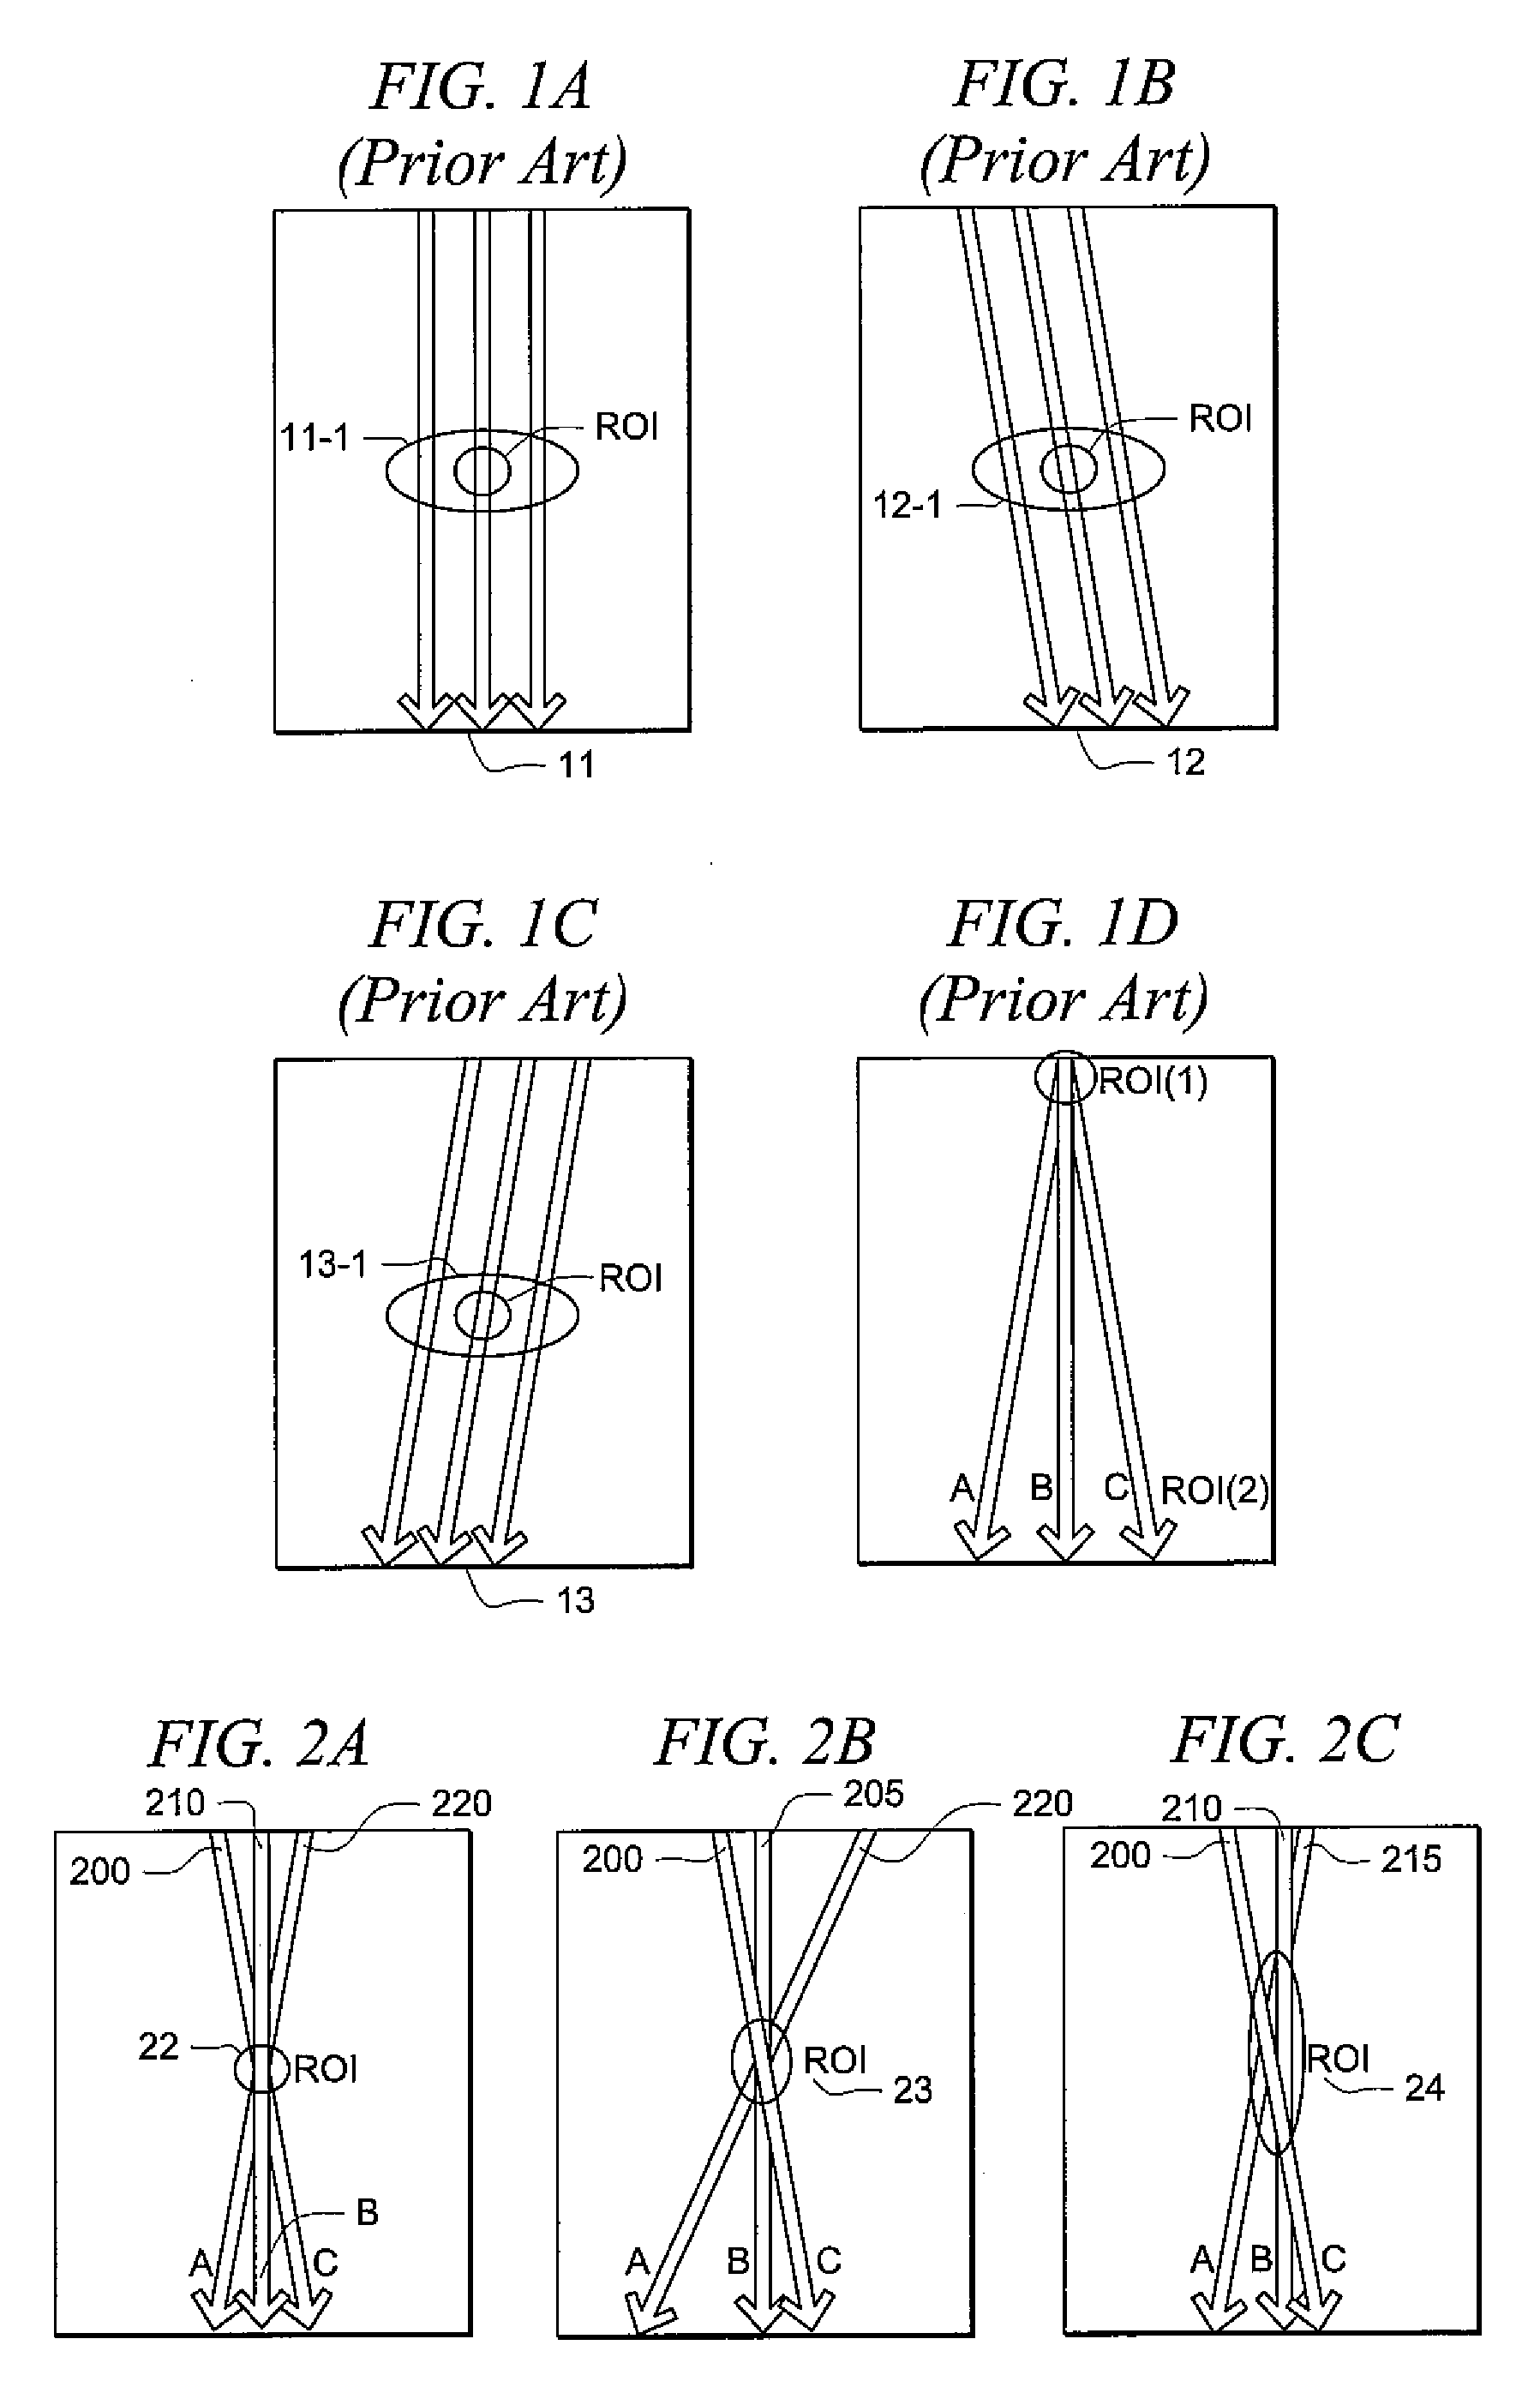 System and method for optimized spatio-temporal sampling